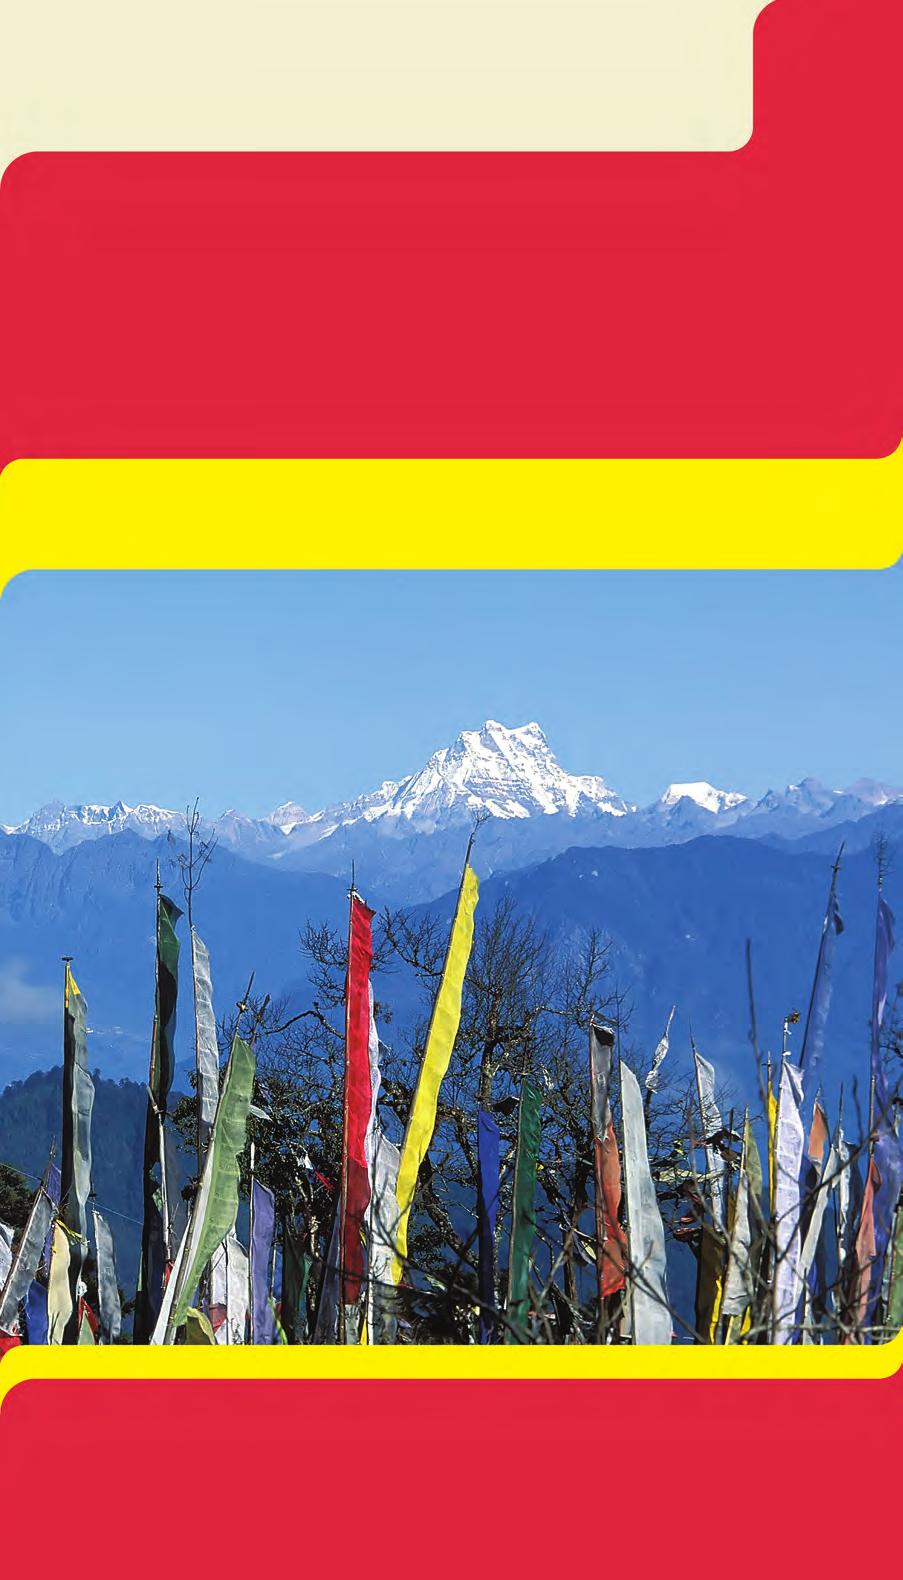 HIMALAYAN KINGDOMS: NEPAL & BHUTAN April 18 May 2, 2017 15 days from $4,997 total price from Boston or New York or Wash,